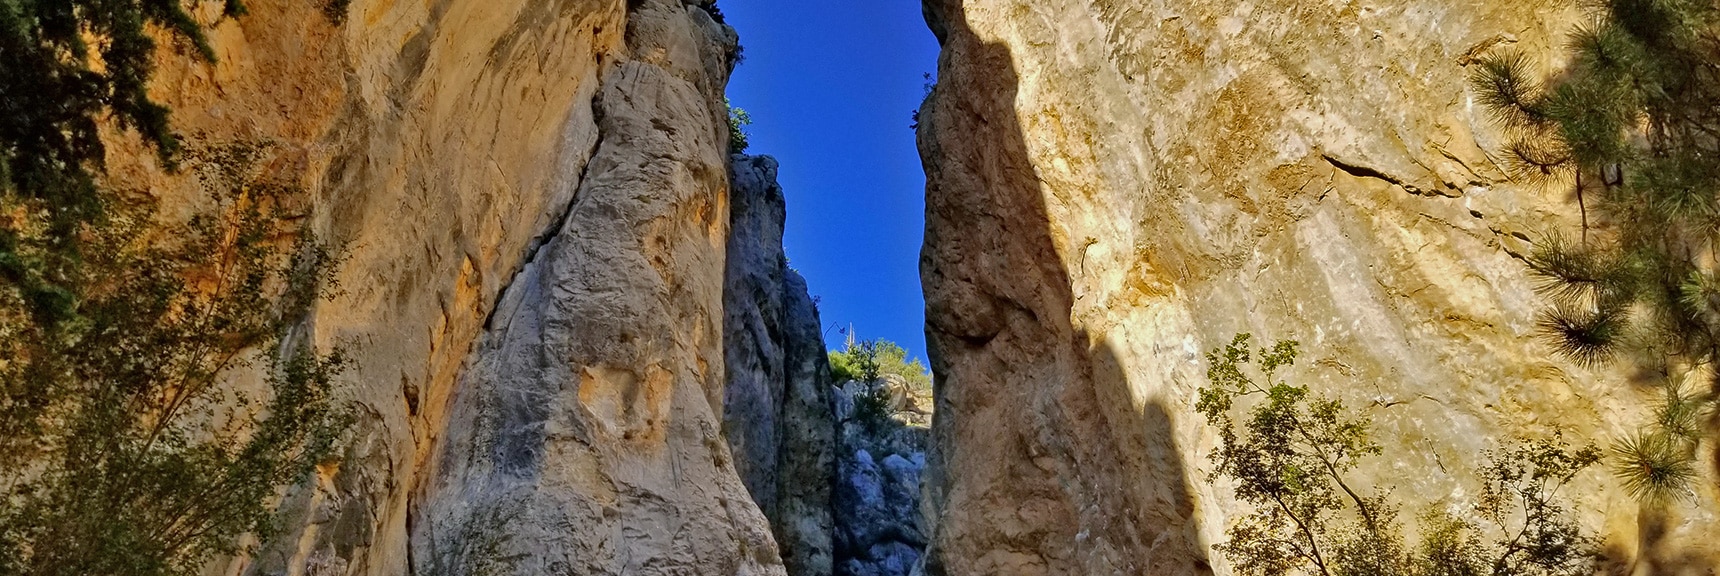 Main Climbing Crack Above Robbers Roost Trail | Robbers Roost and Beyond | Spring Mountains, Nevada